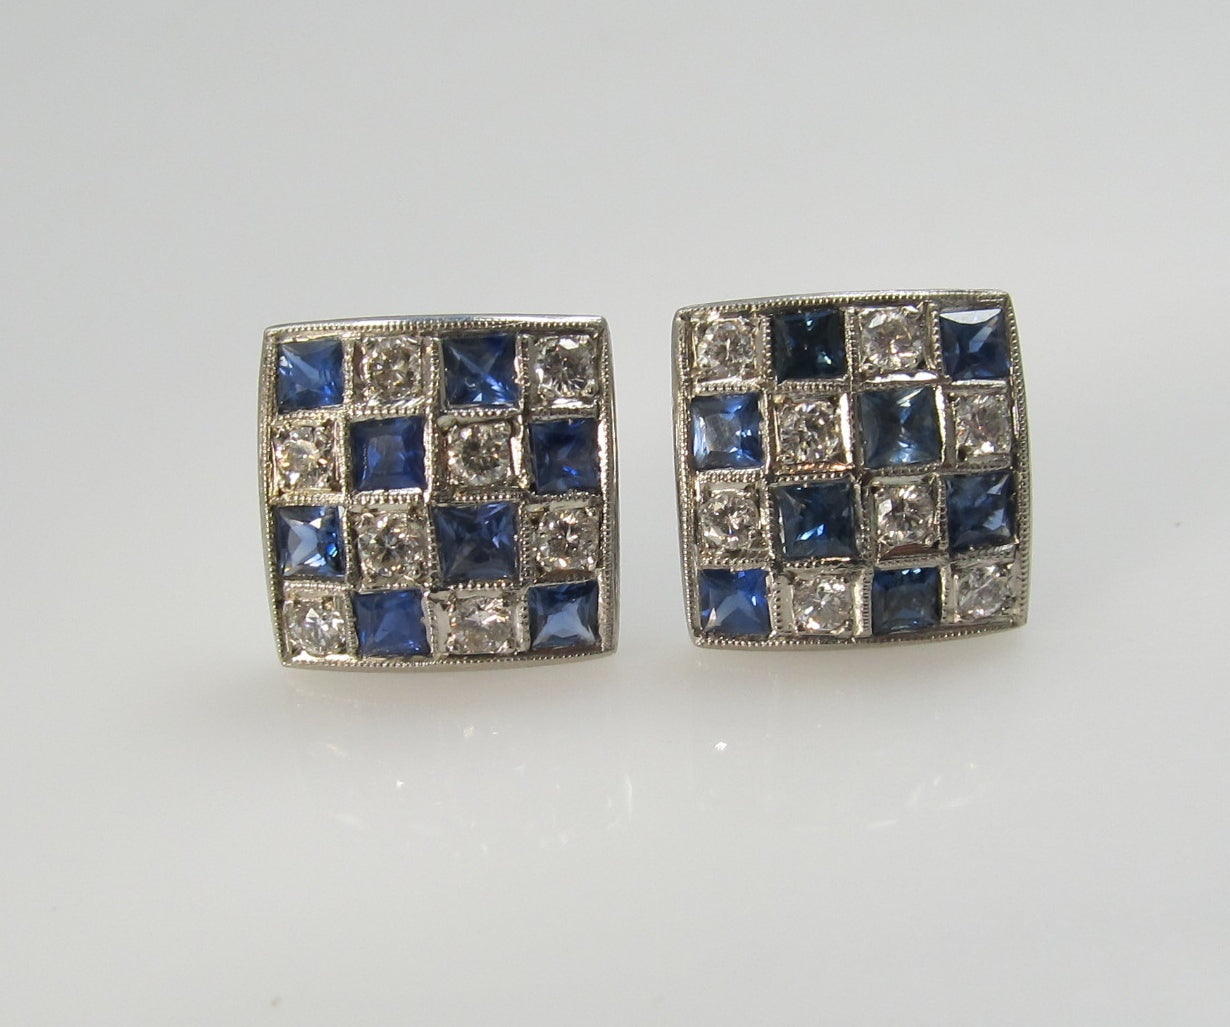 Antique platinum checkerboard earrings with sapphires and diamonds